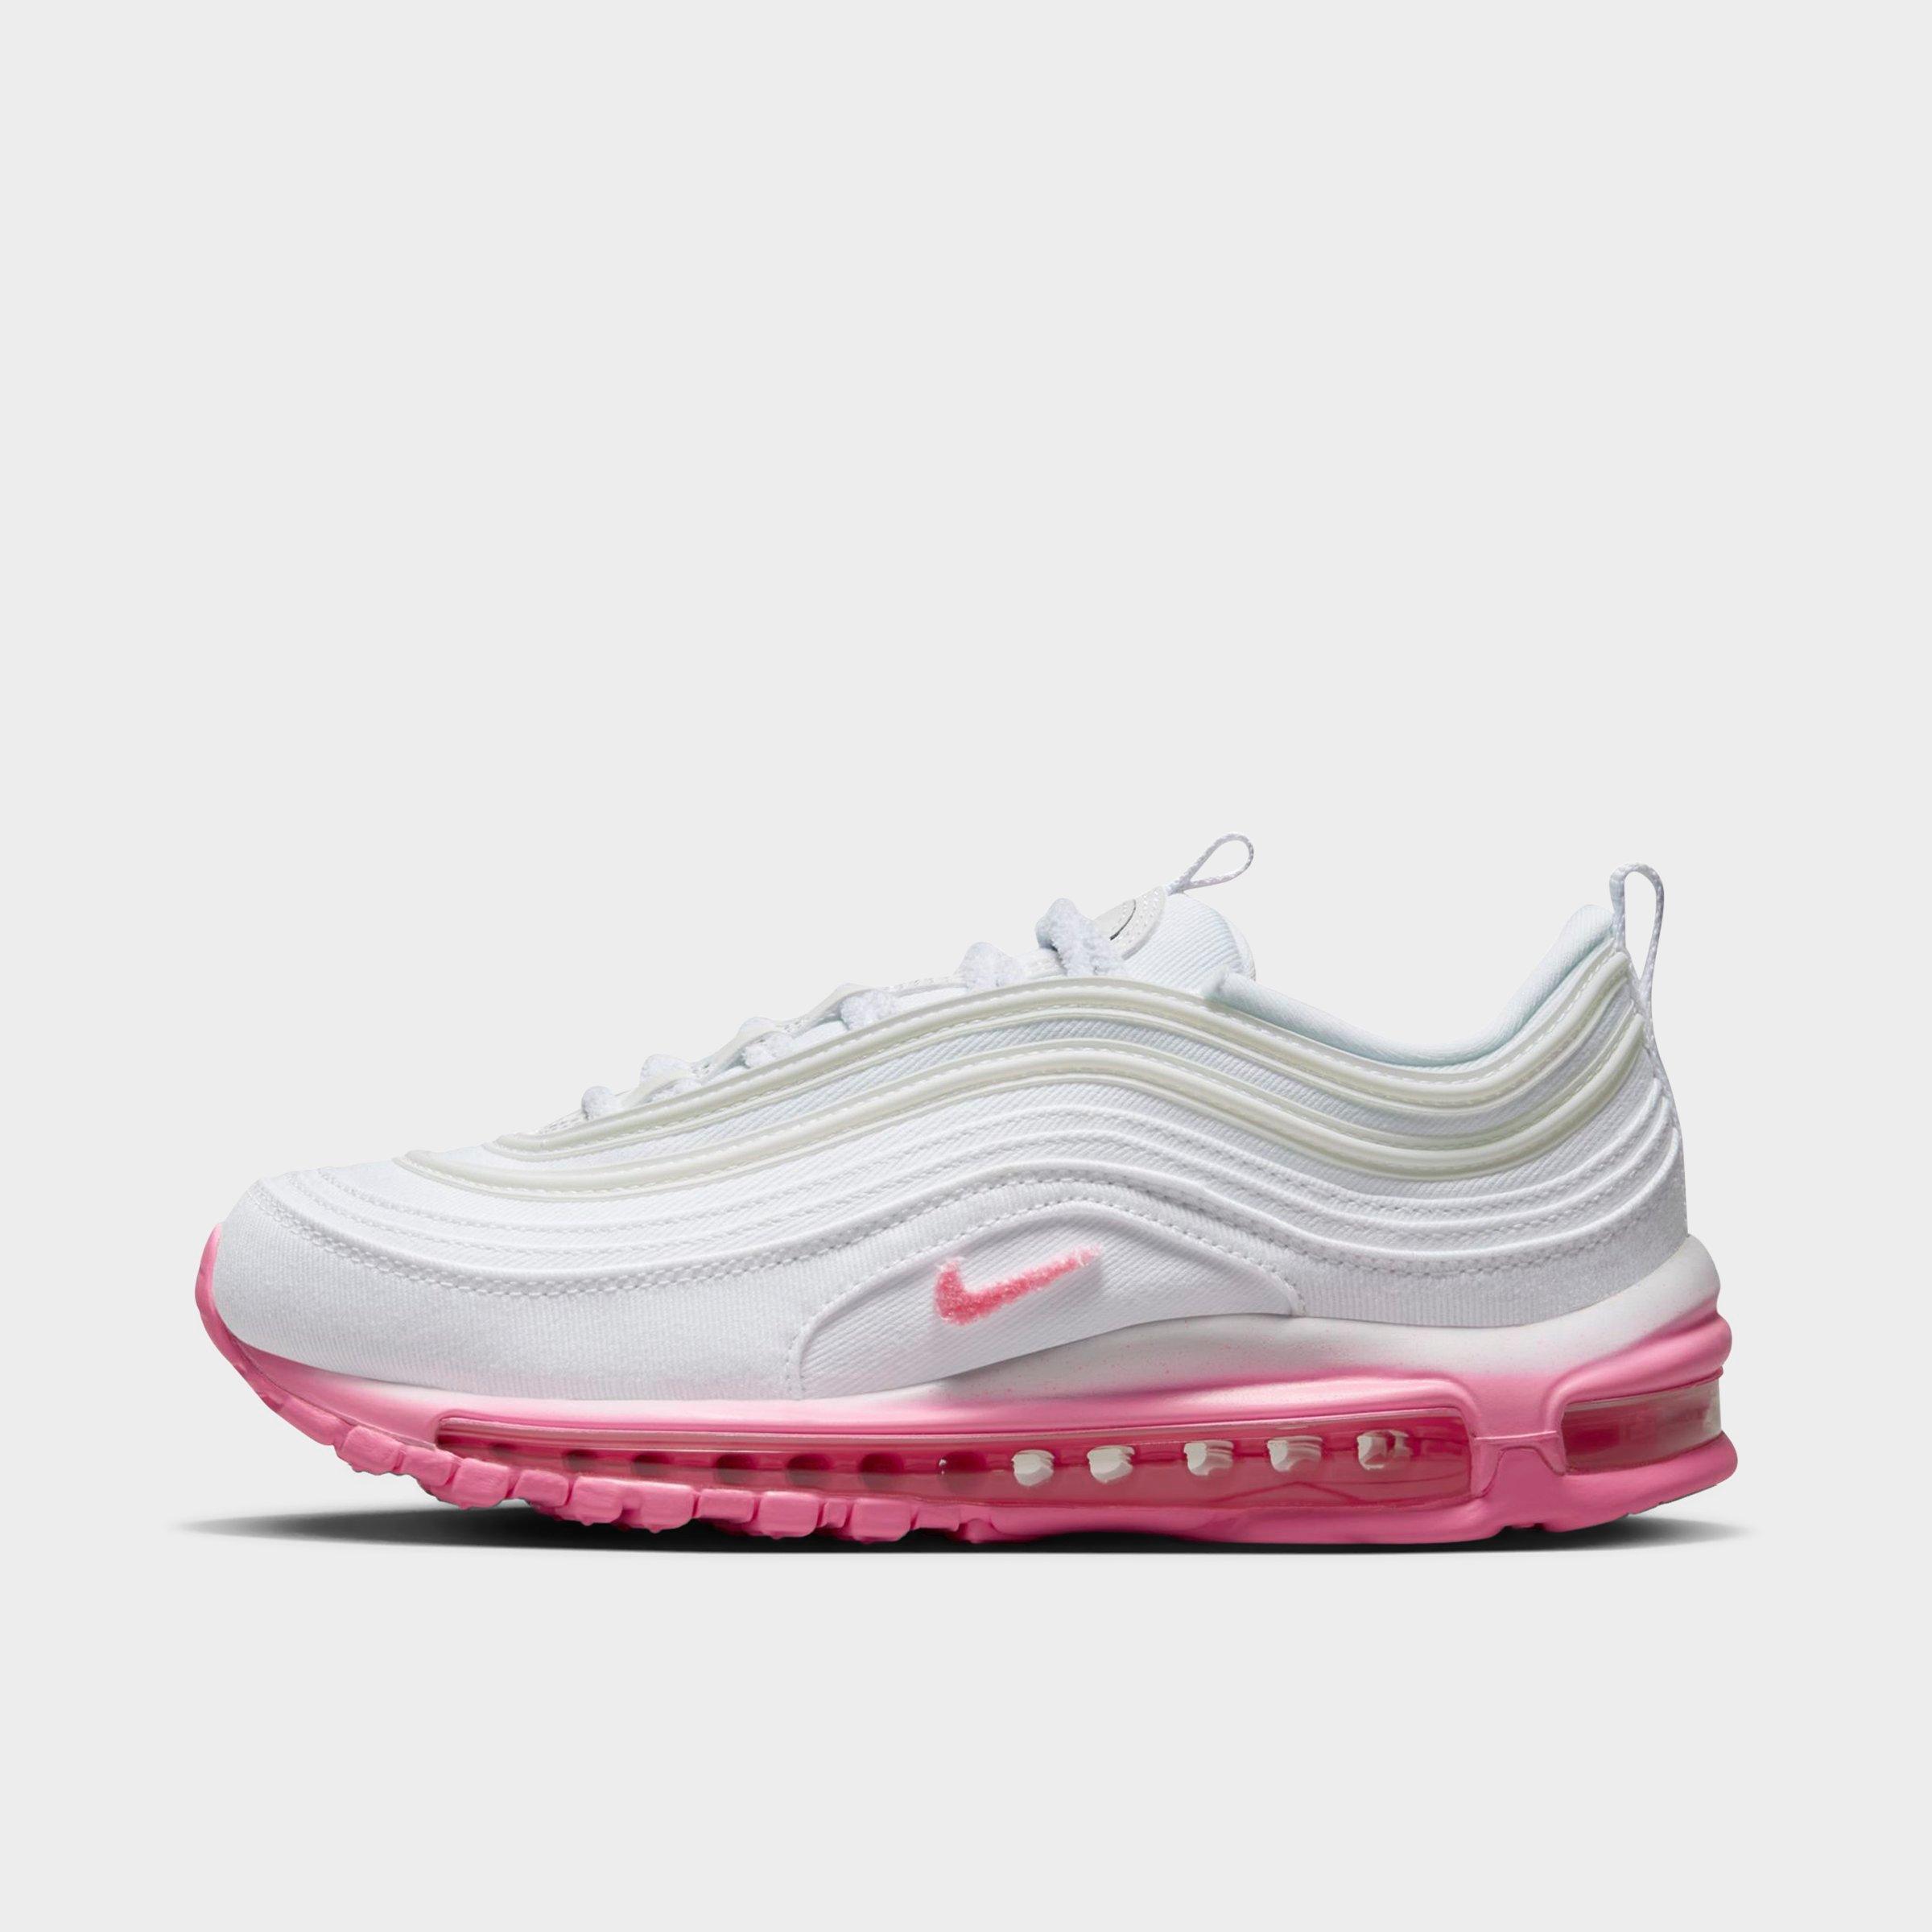 NIKE NIKE WOMEN'S AIR MAX 97 SE CHENILLE CASUAL SHOES